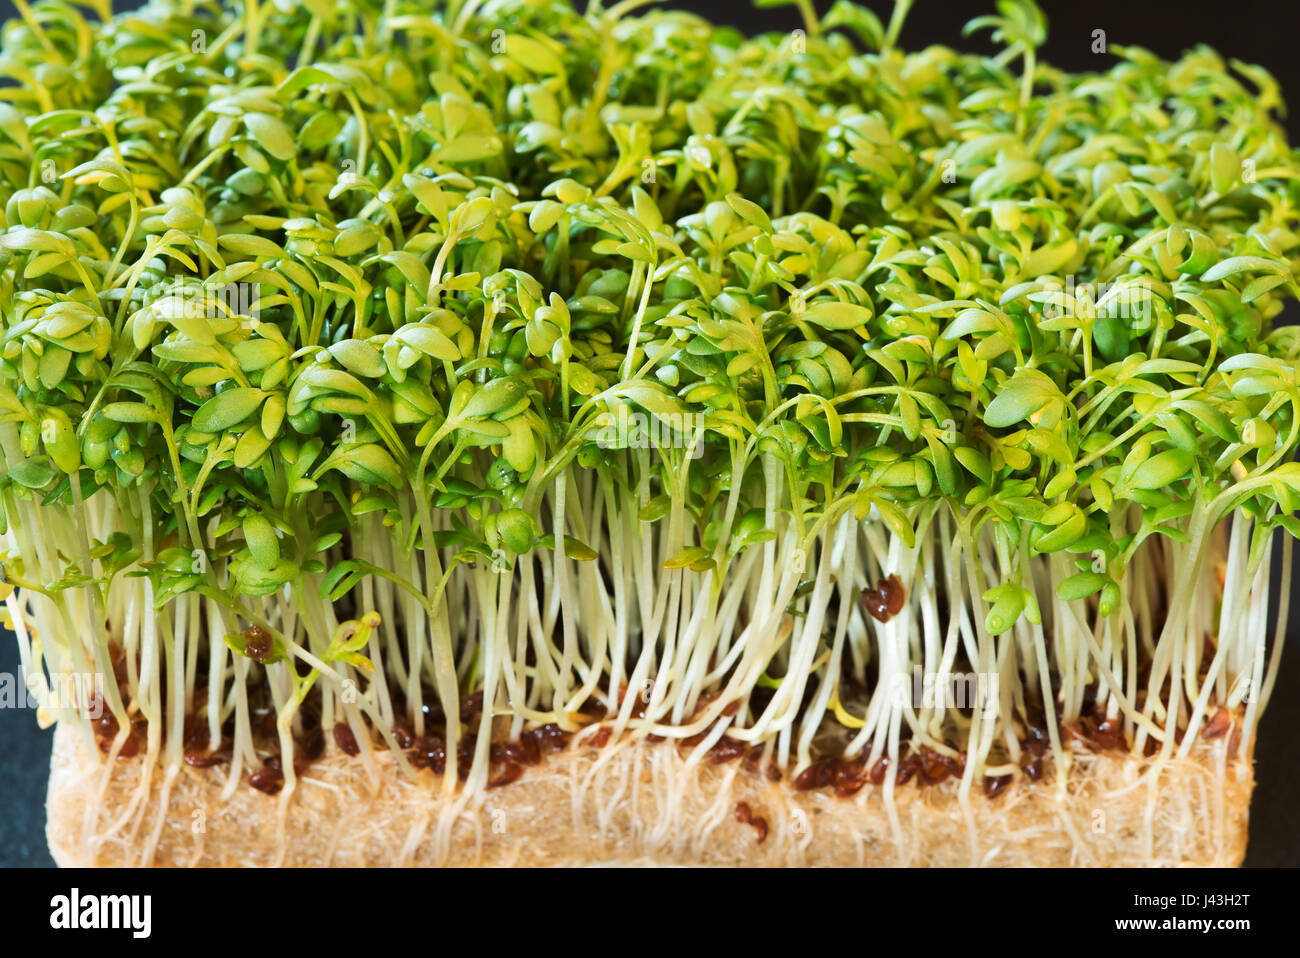 Fresh and tasty cress or garden cress shoots growing on hydroponics substrate as found inside box bought at local store. Stock Photo